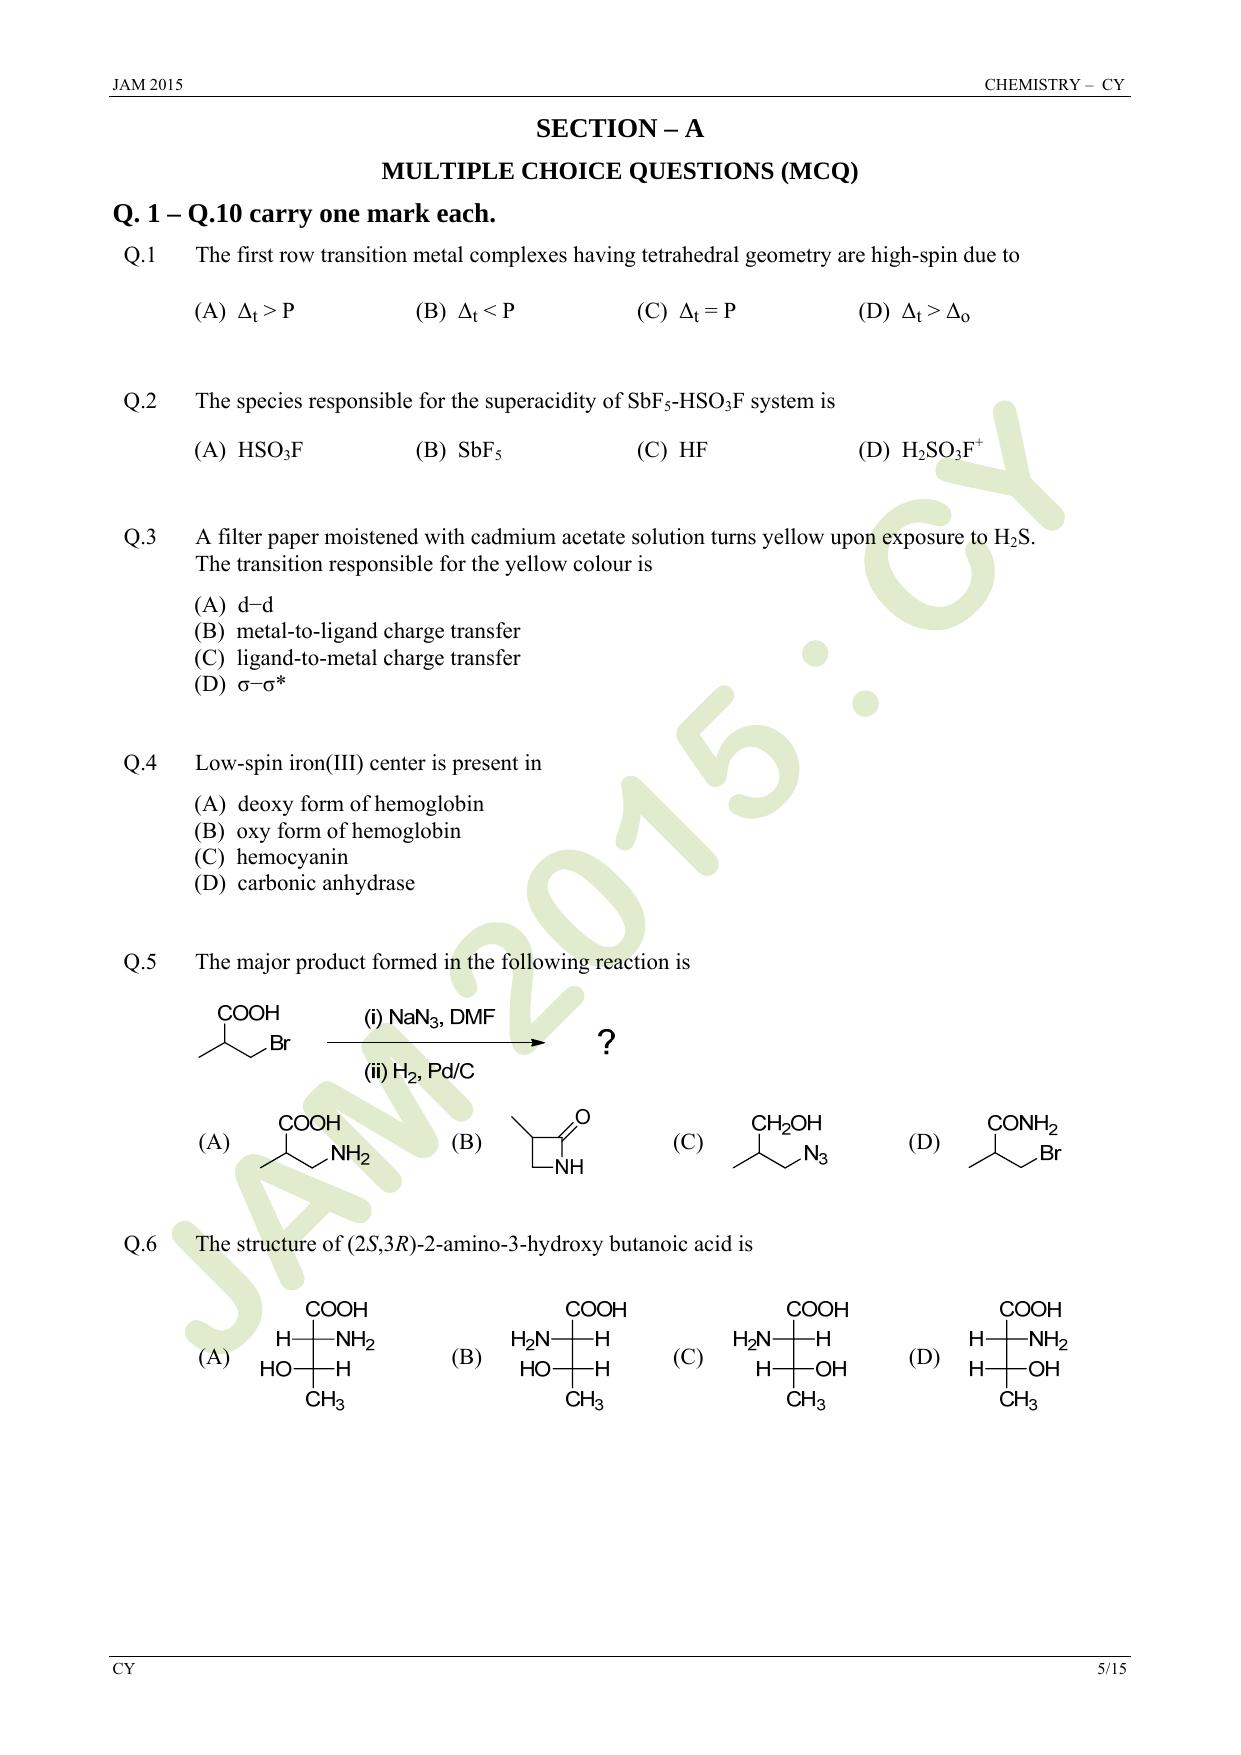 JAM 2015: CY Question Paper - Page 5